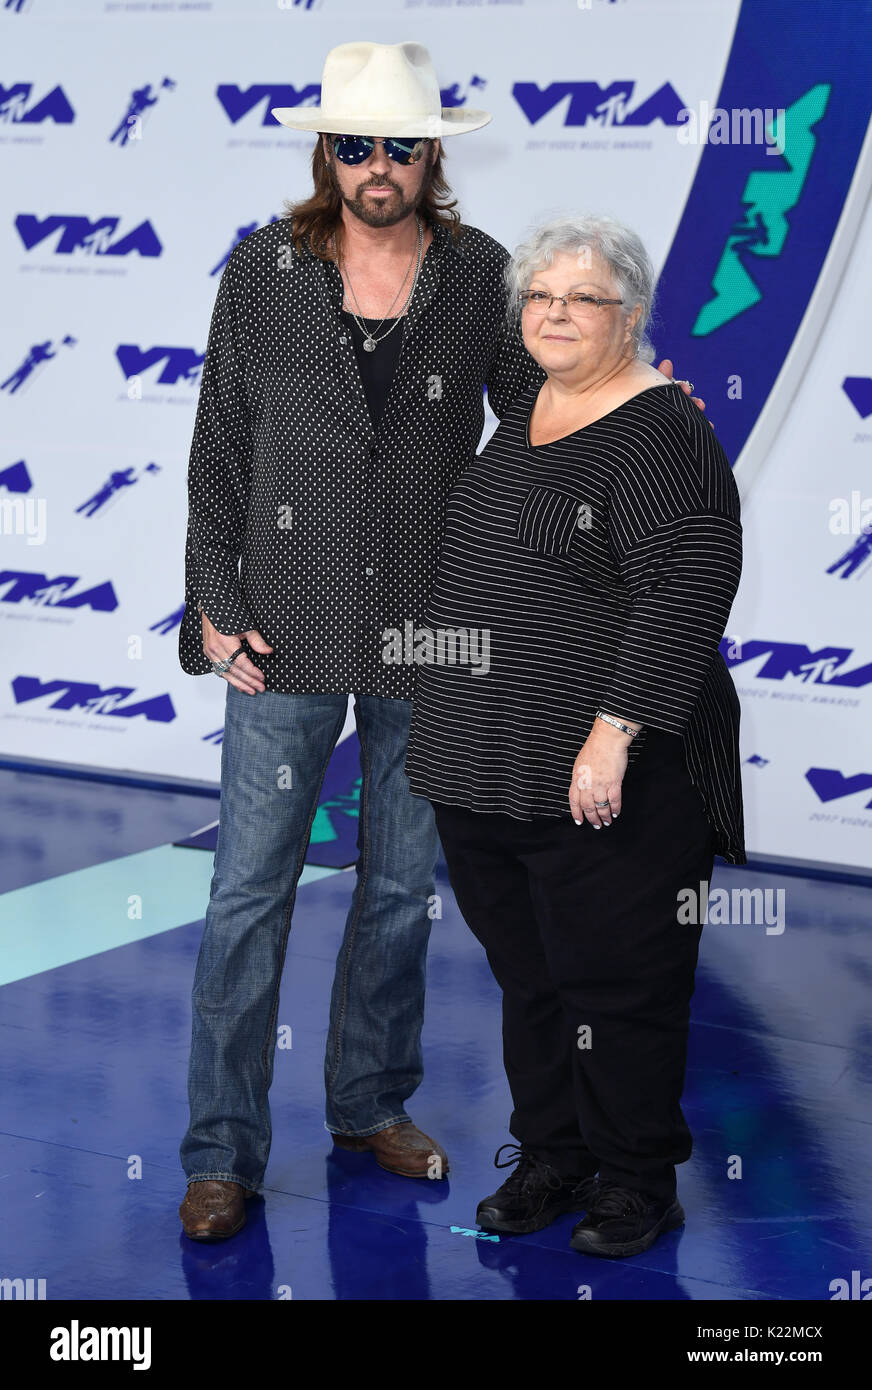 Billy Ray Cyrus and Susan Bro arriving at the MTV Video Music Awards 2017, held at the Forum, Los Angeles. Photo credit should read: Doug Peters/EMPICS Entertainment Stock Photo